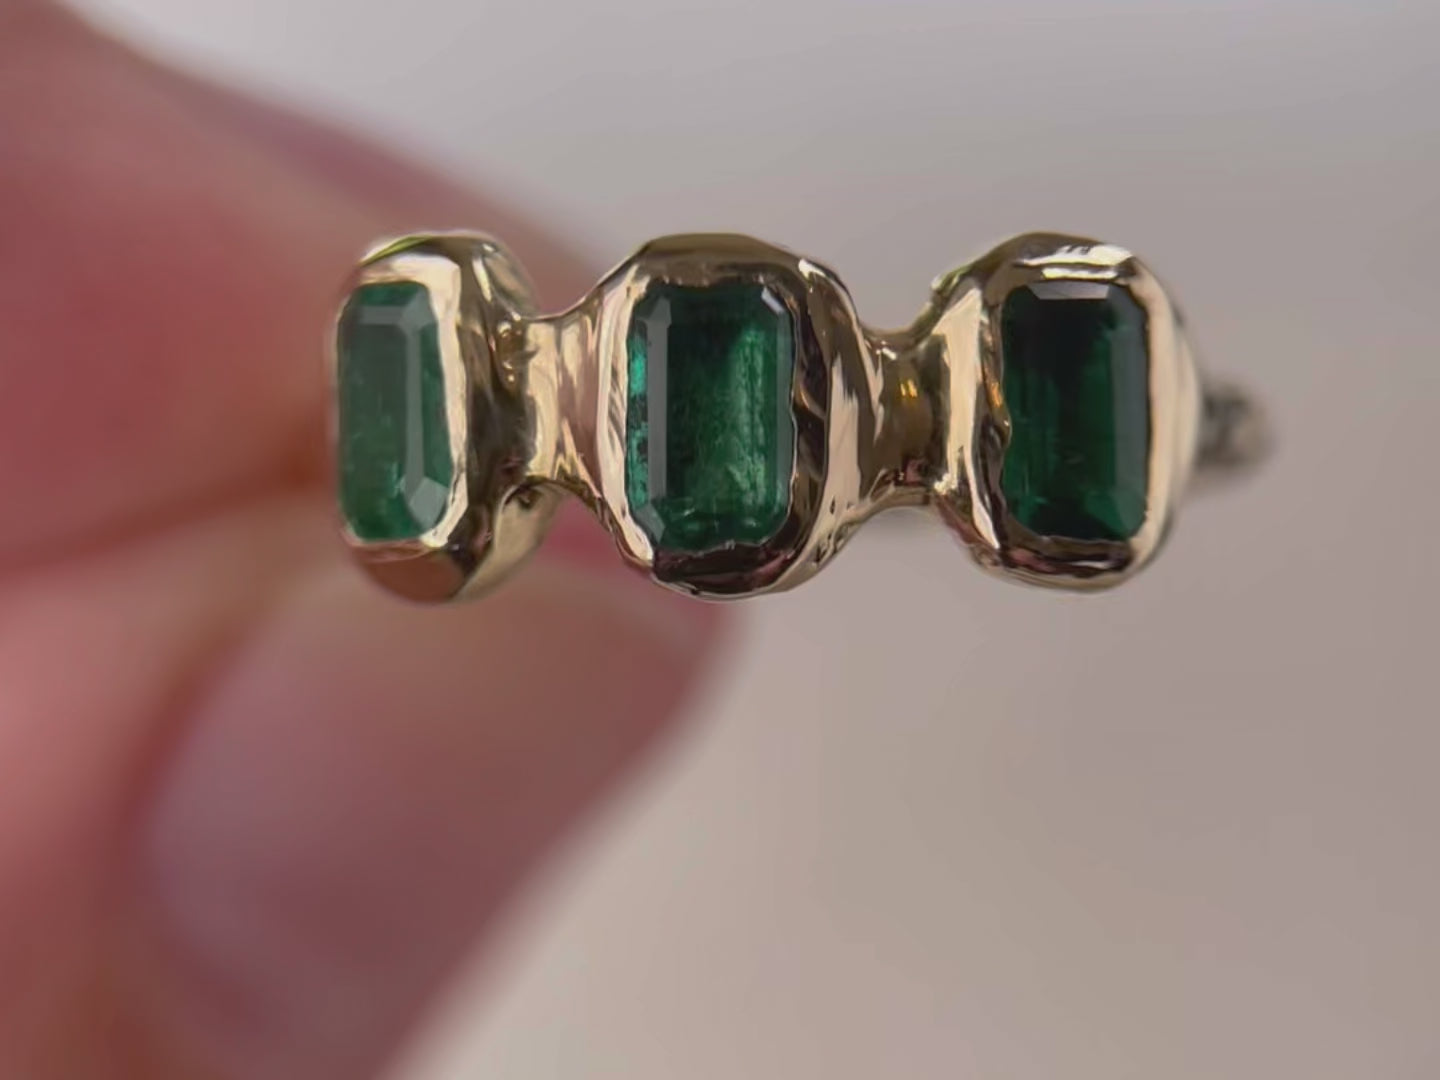 Close  up  video  of  three small emerald cut emeralds that are embedded into a 14k gold ring giving it an organic look.